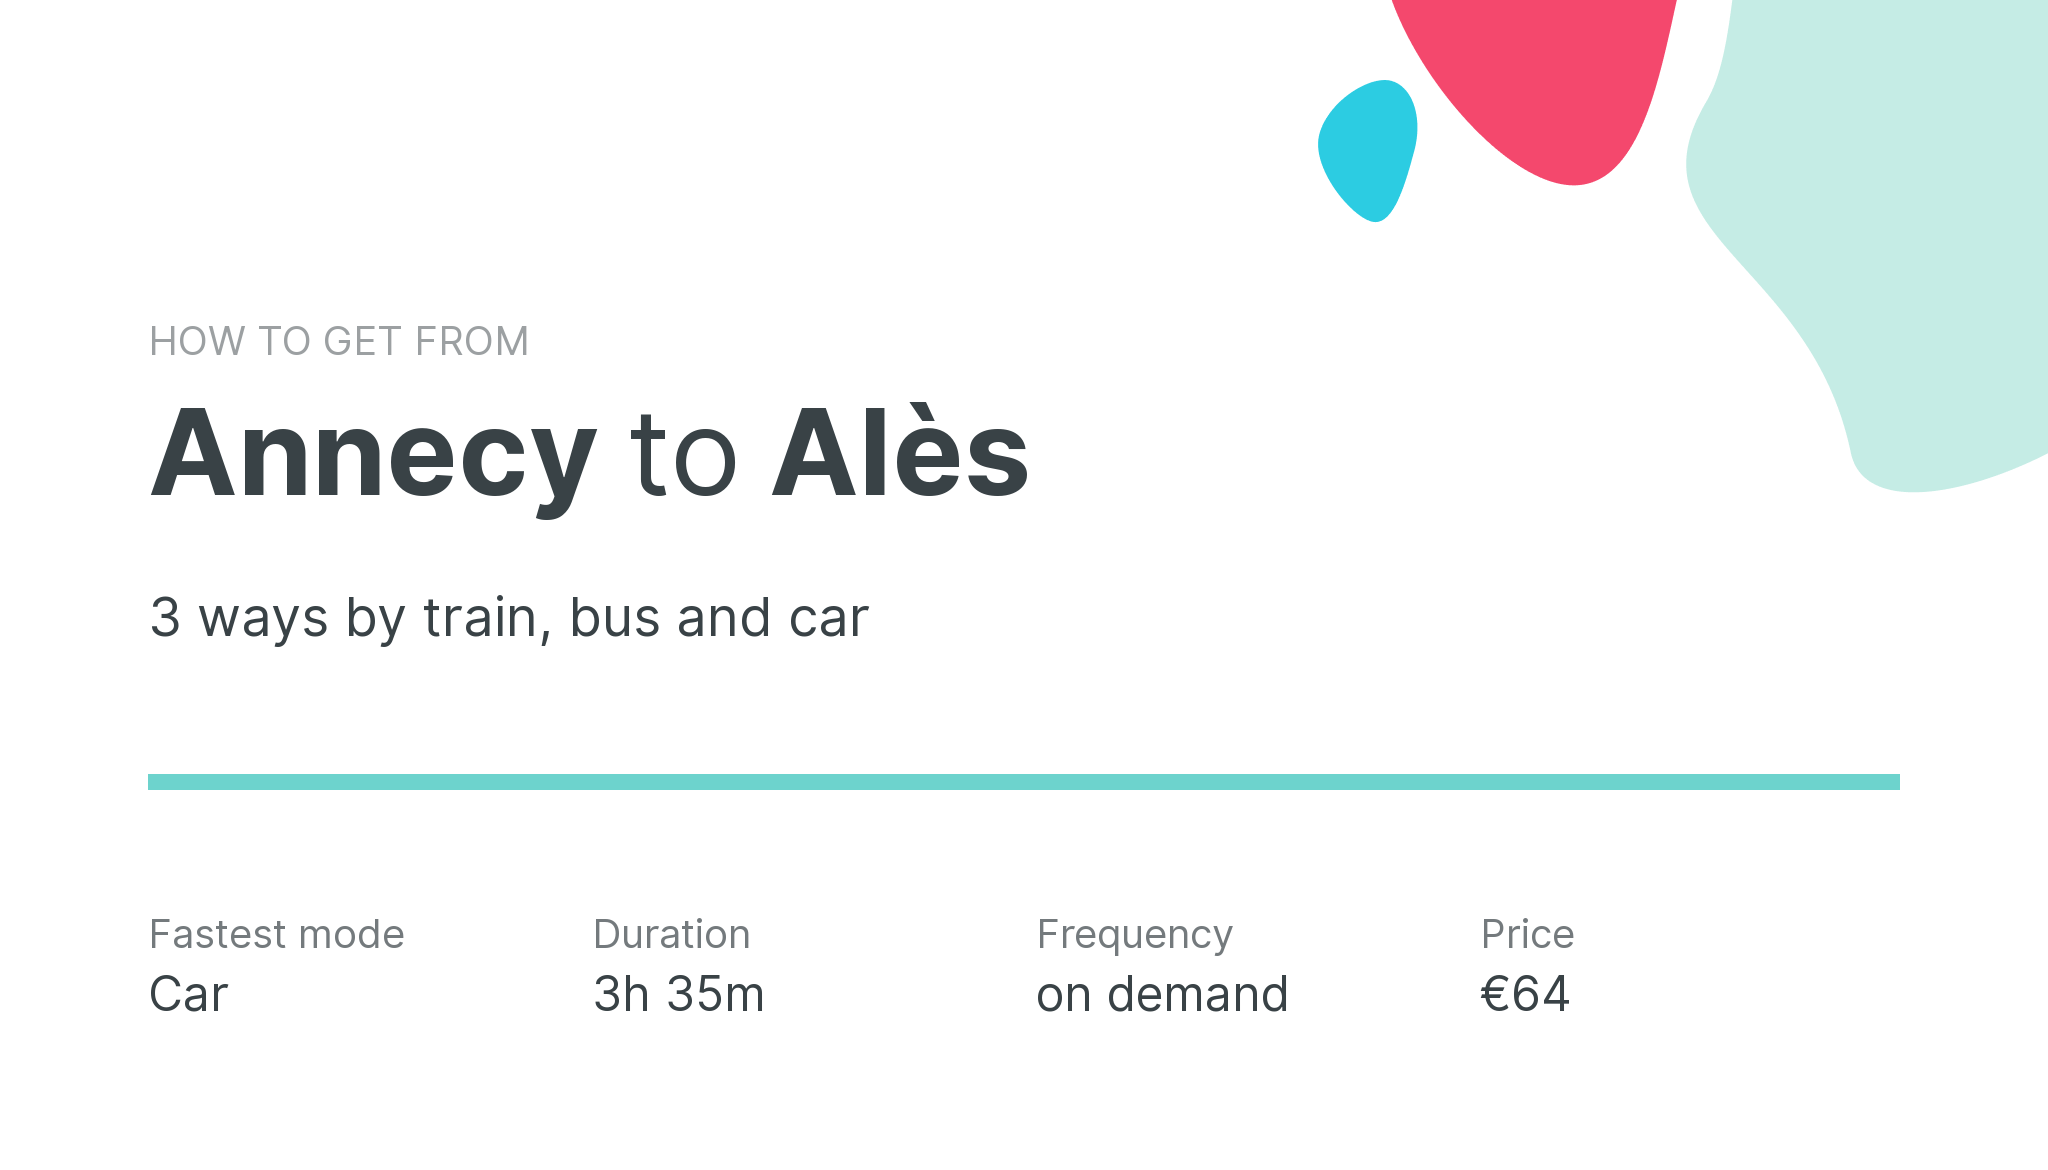 How do I get from Annecy to Alès